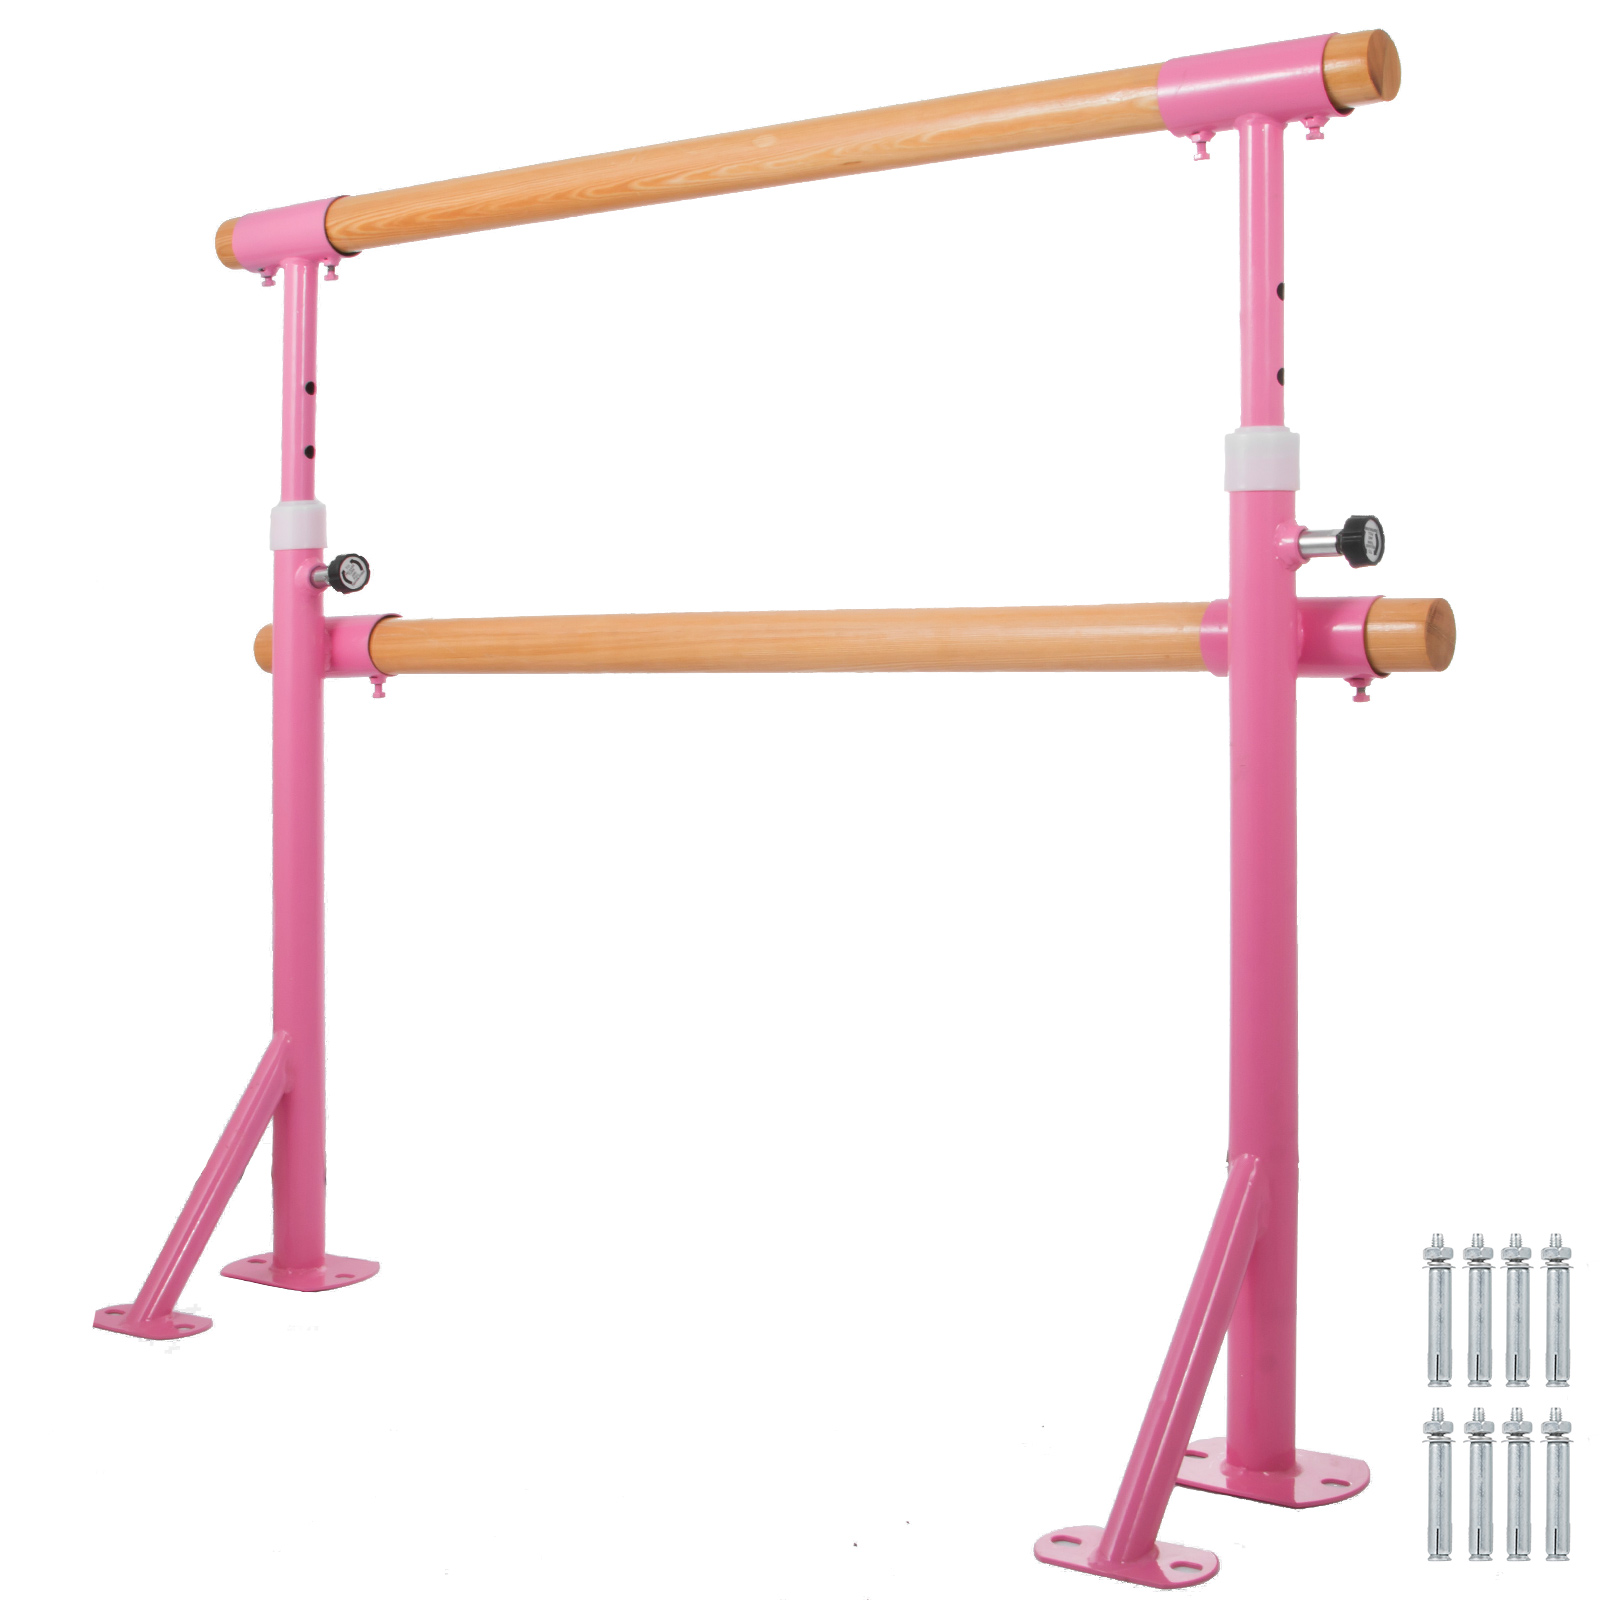 5FT Ballet Barre Stretch Bar Double Pine Dancing Bar Exercise Training Equipment от Vevor Many GEOs